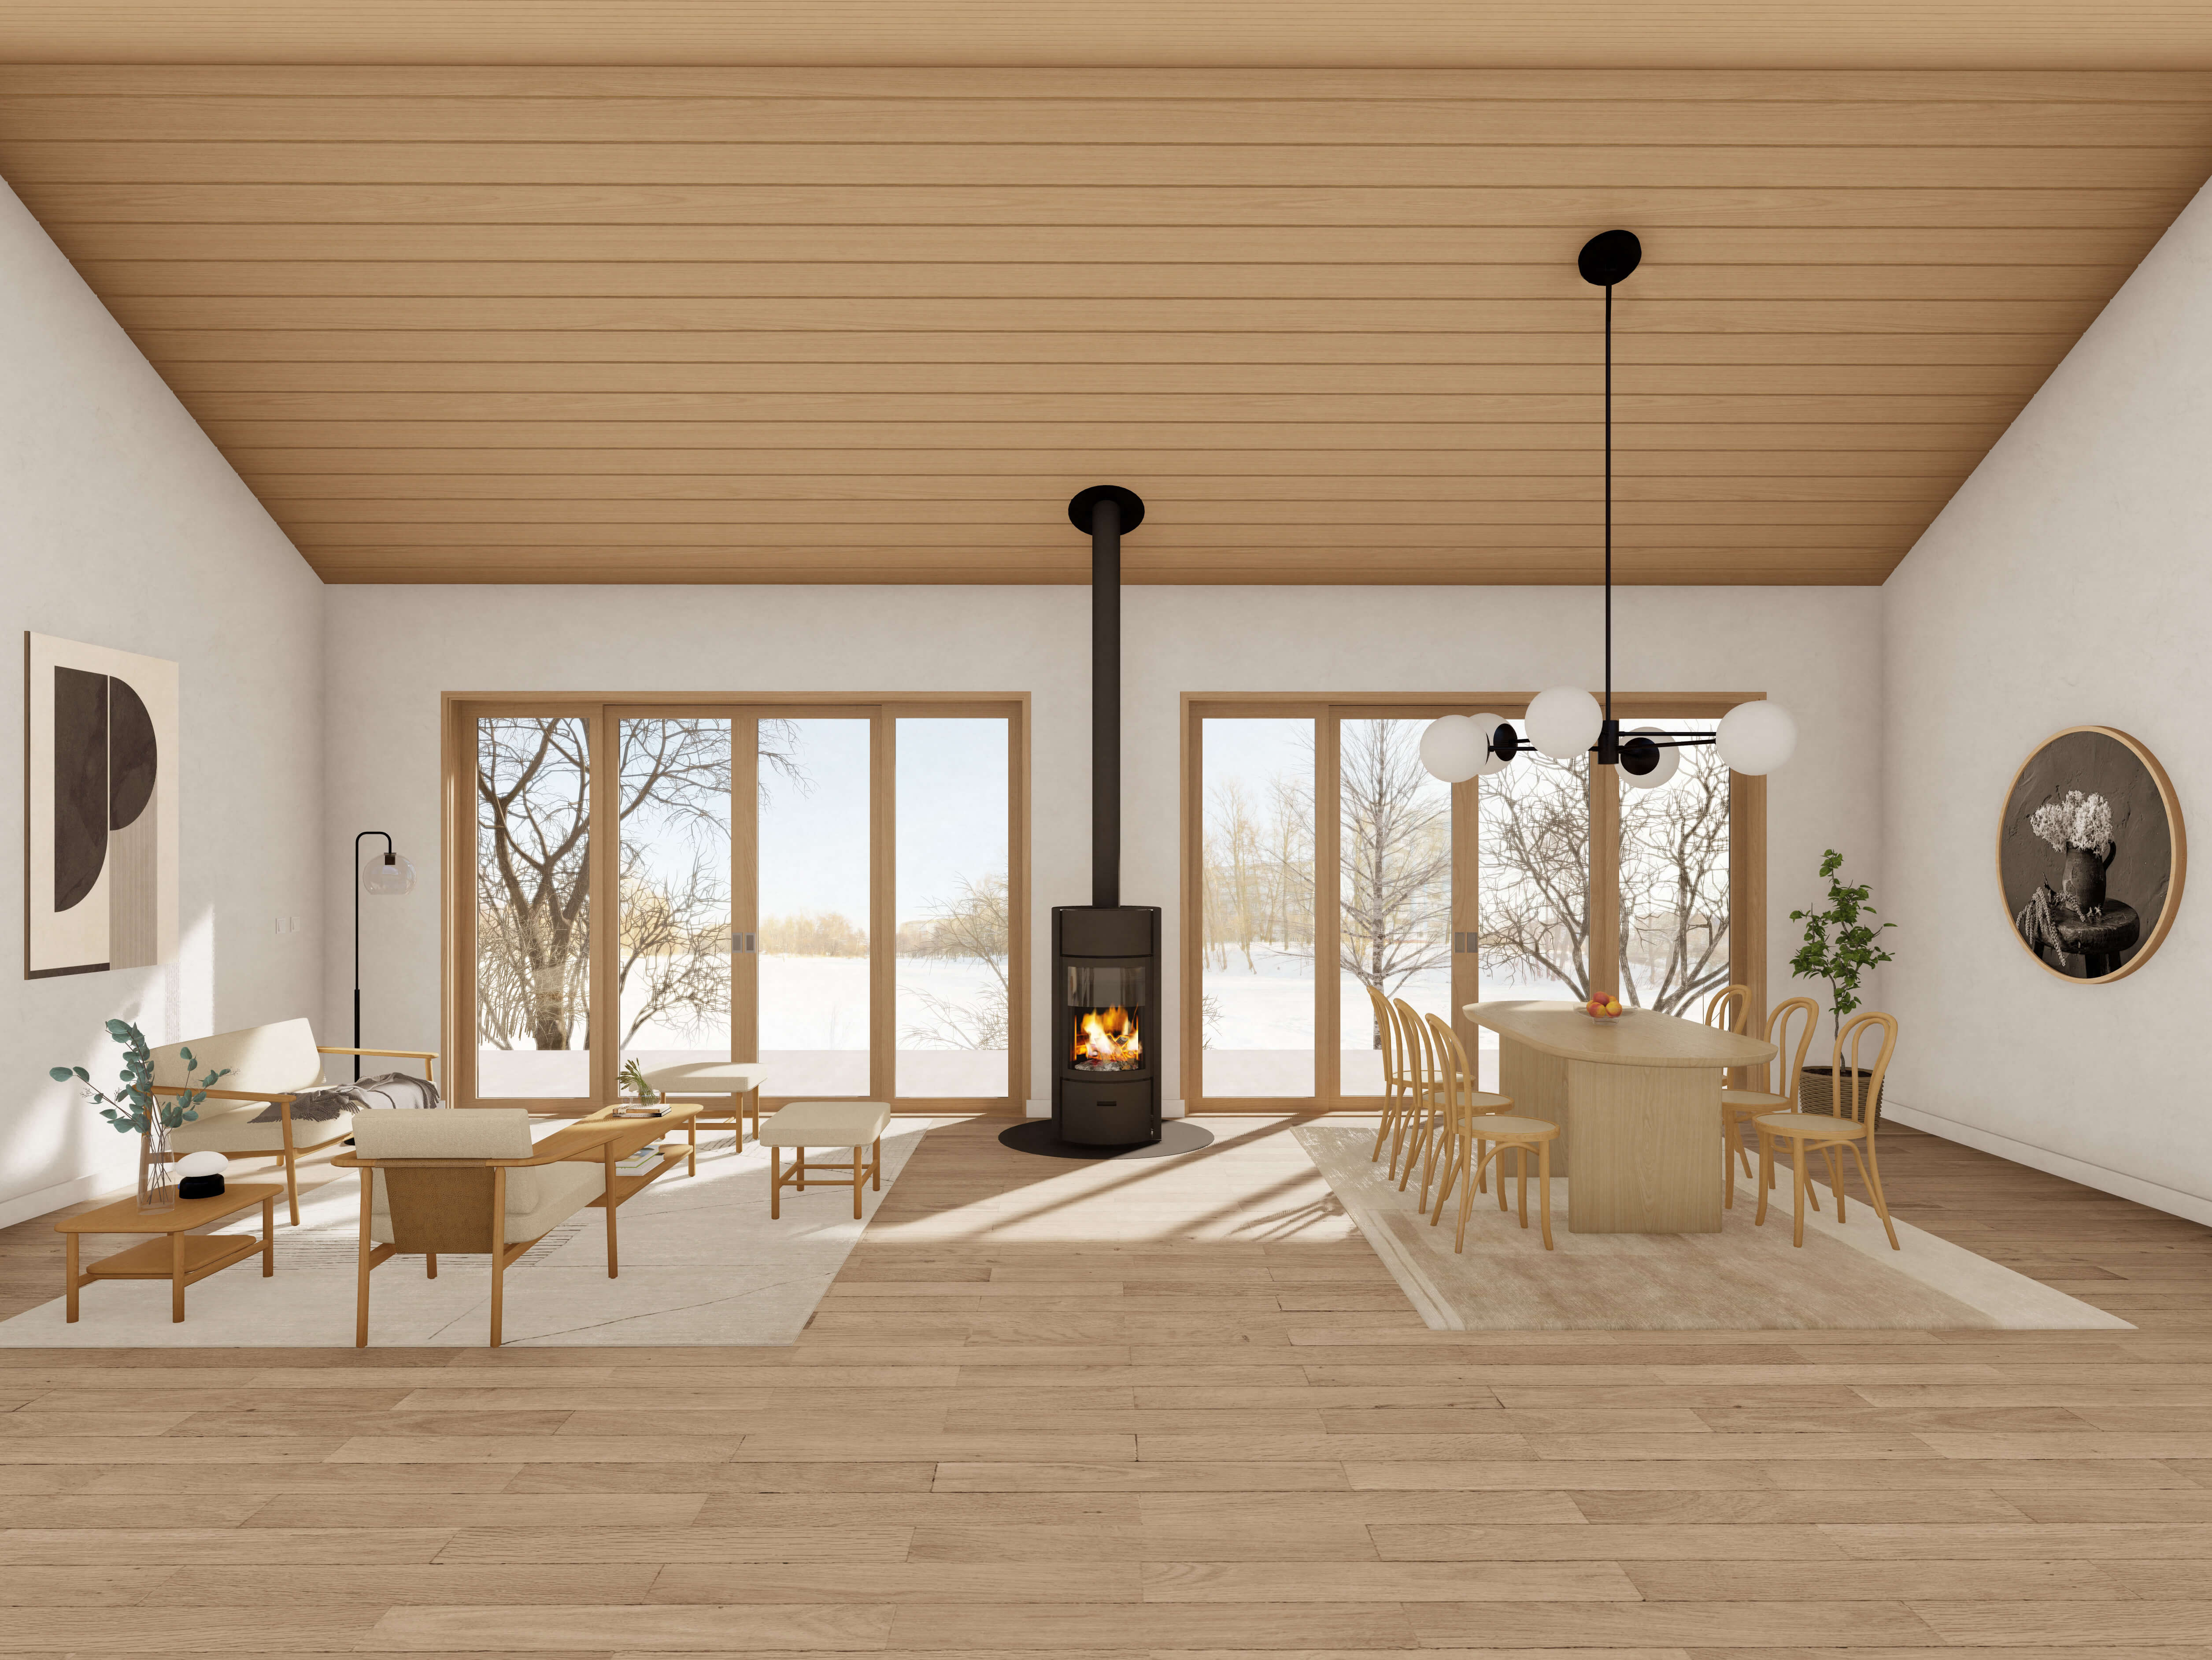 DesignwithFRANK's 2 Bedroom Modern Large Cabin. Open Plan Dining And Living. Wood Floor and ceiling with white walls